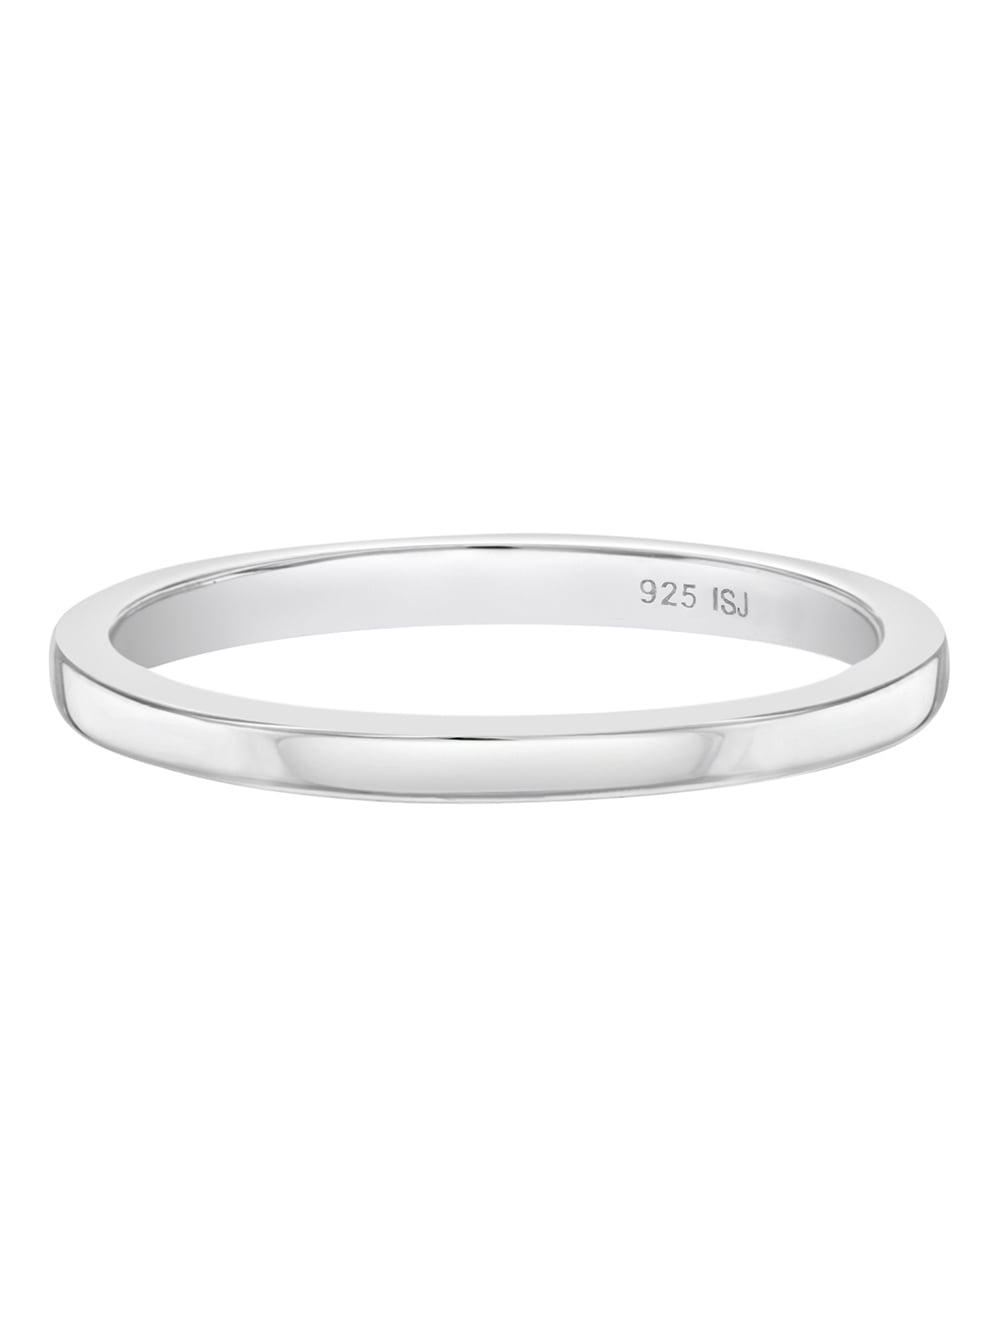 Personalized Plain Polished Midi Toe Ring Band 925 Silver Sterling Adjustable Mid Finger Custom Engraved 